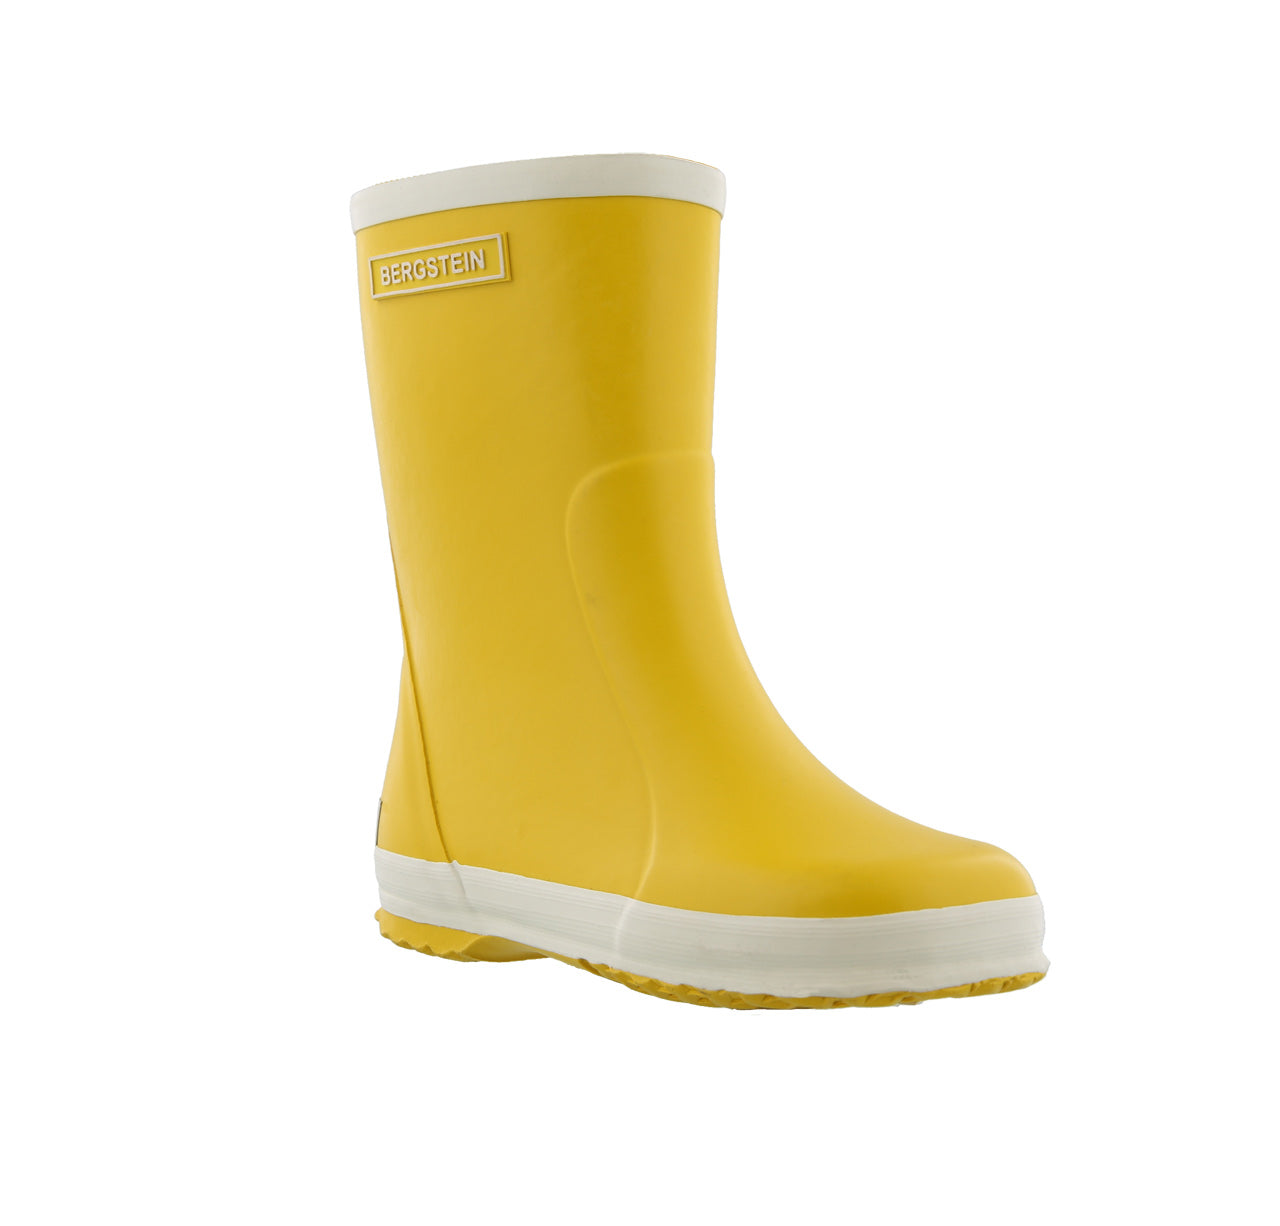 Natural Rubber Gumboots - Yellow (31 only) *Last Pair!